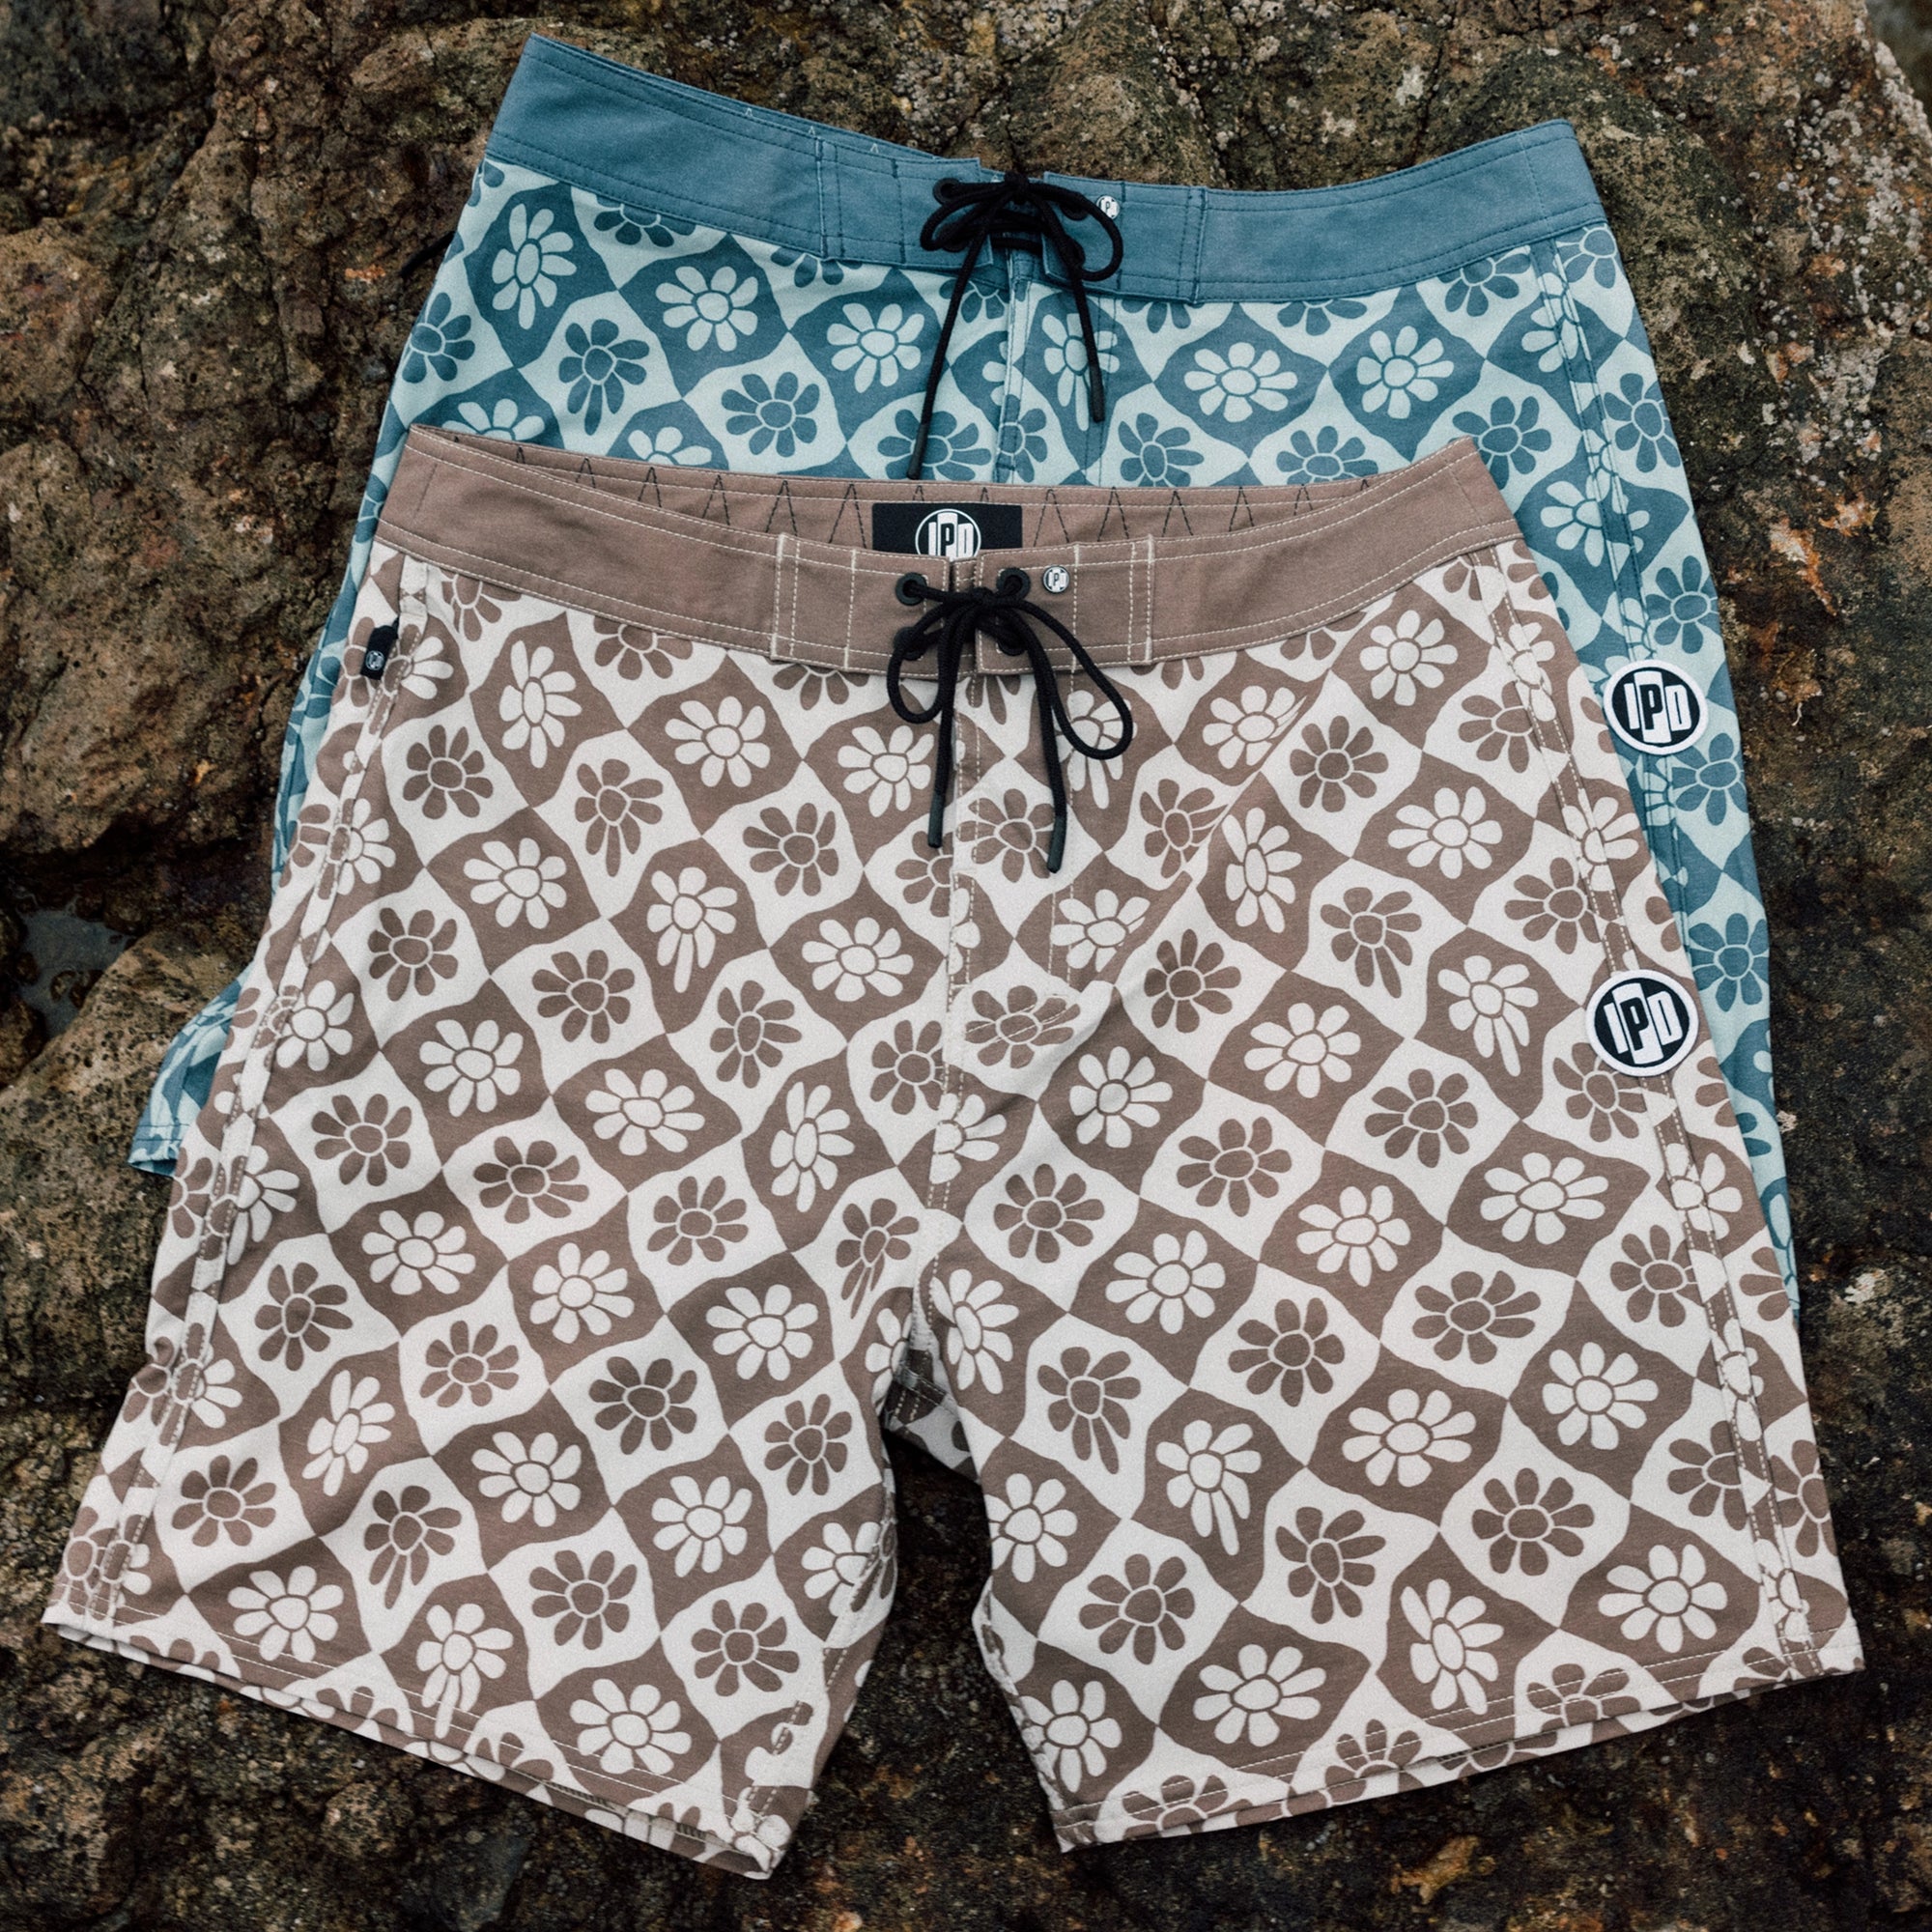 Blue and brown IPD flower print board shorts layered on rocks.